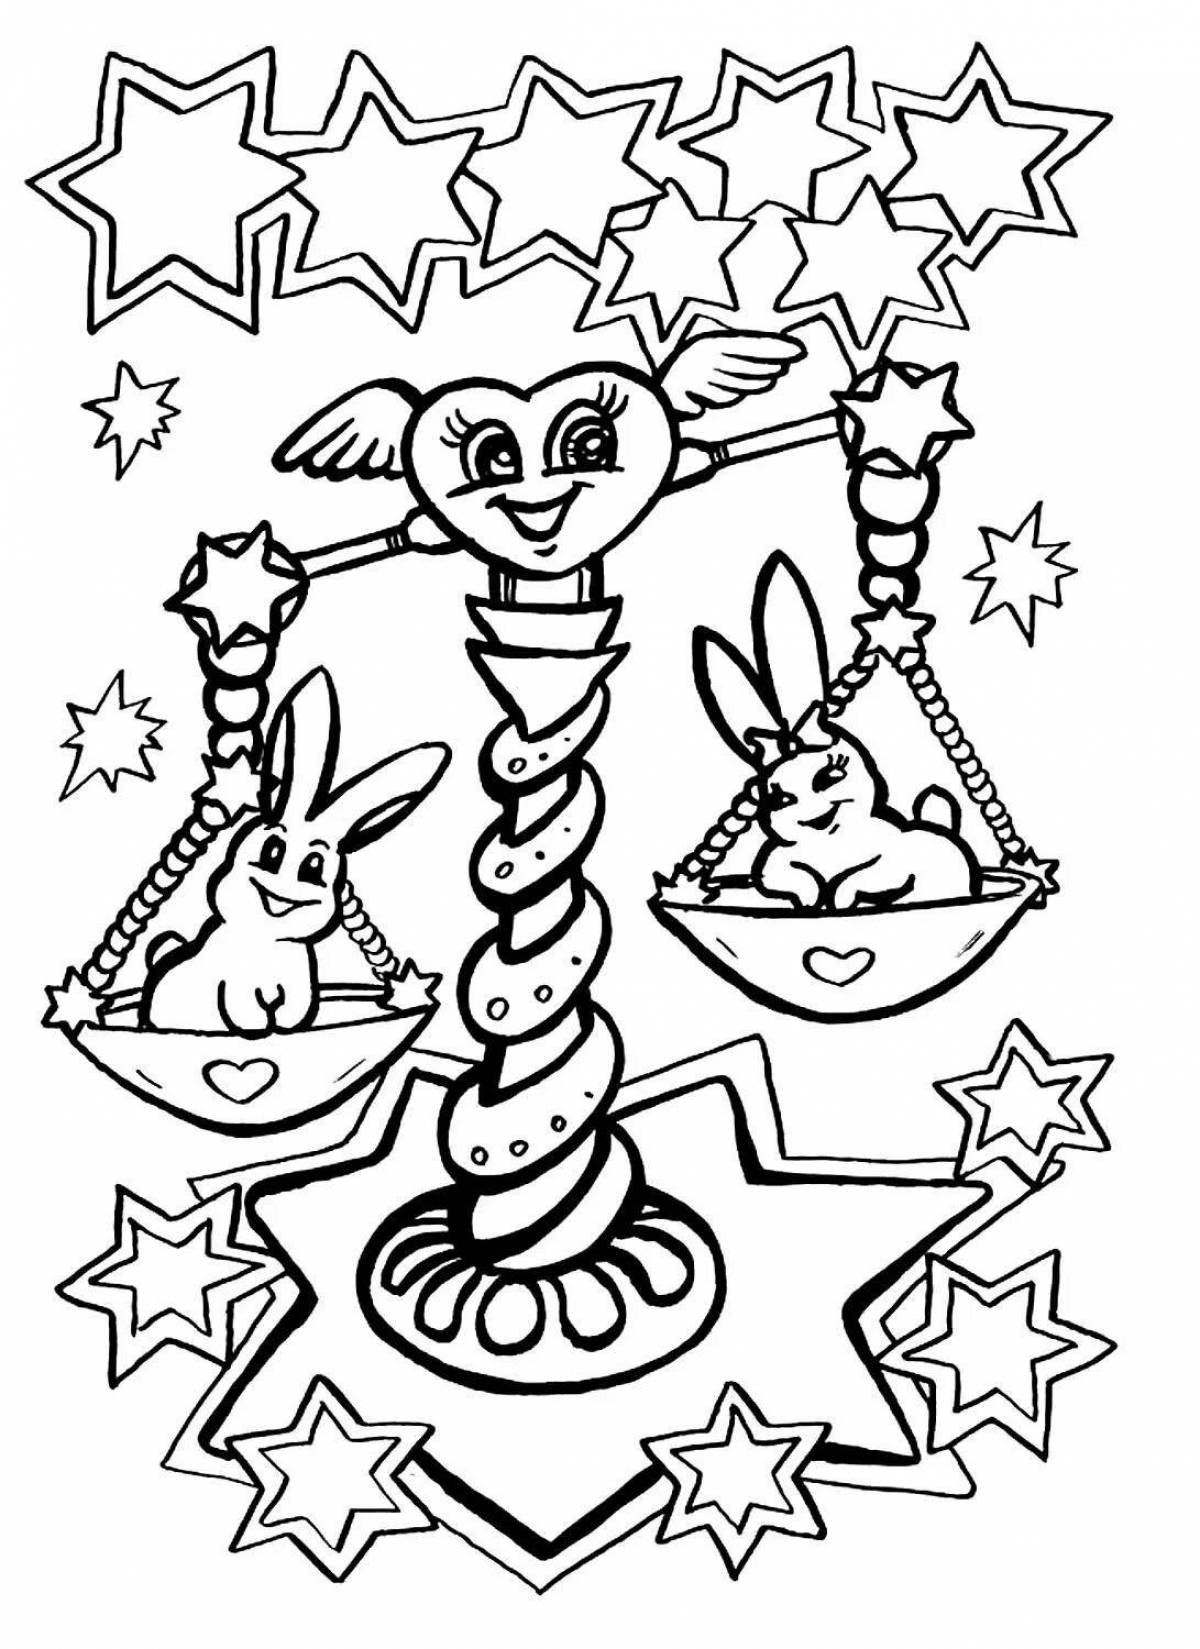 Colorful coloring pages with zodiac signs to develop patience in children